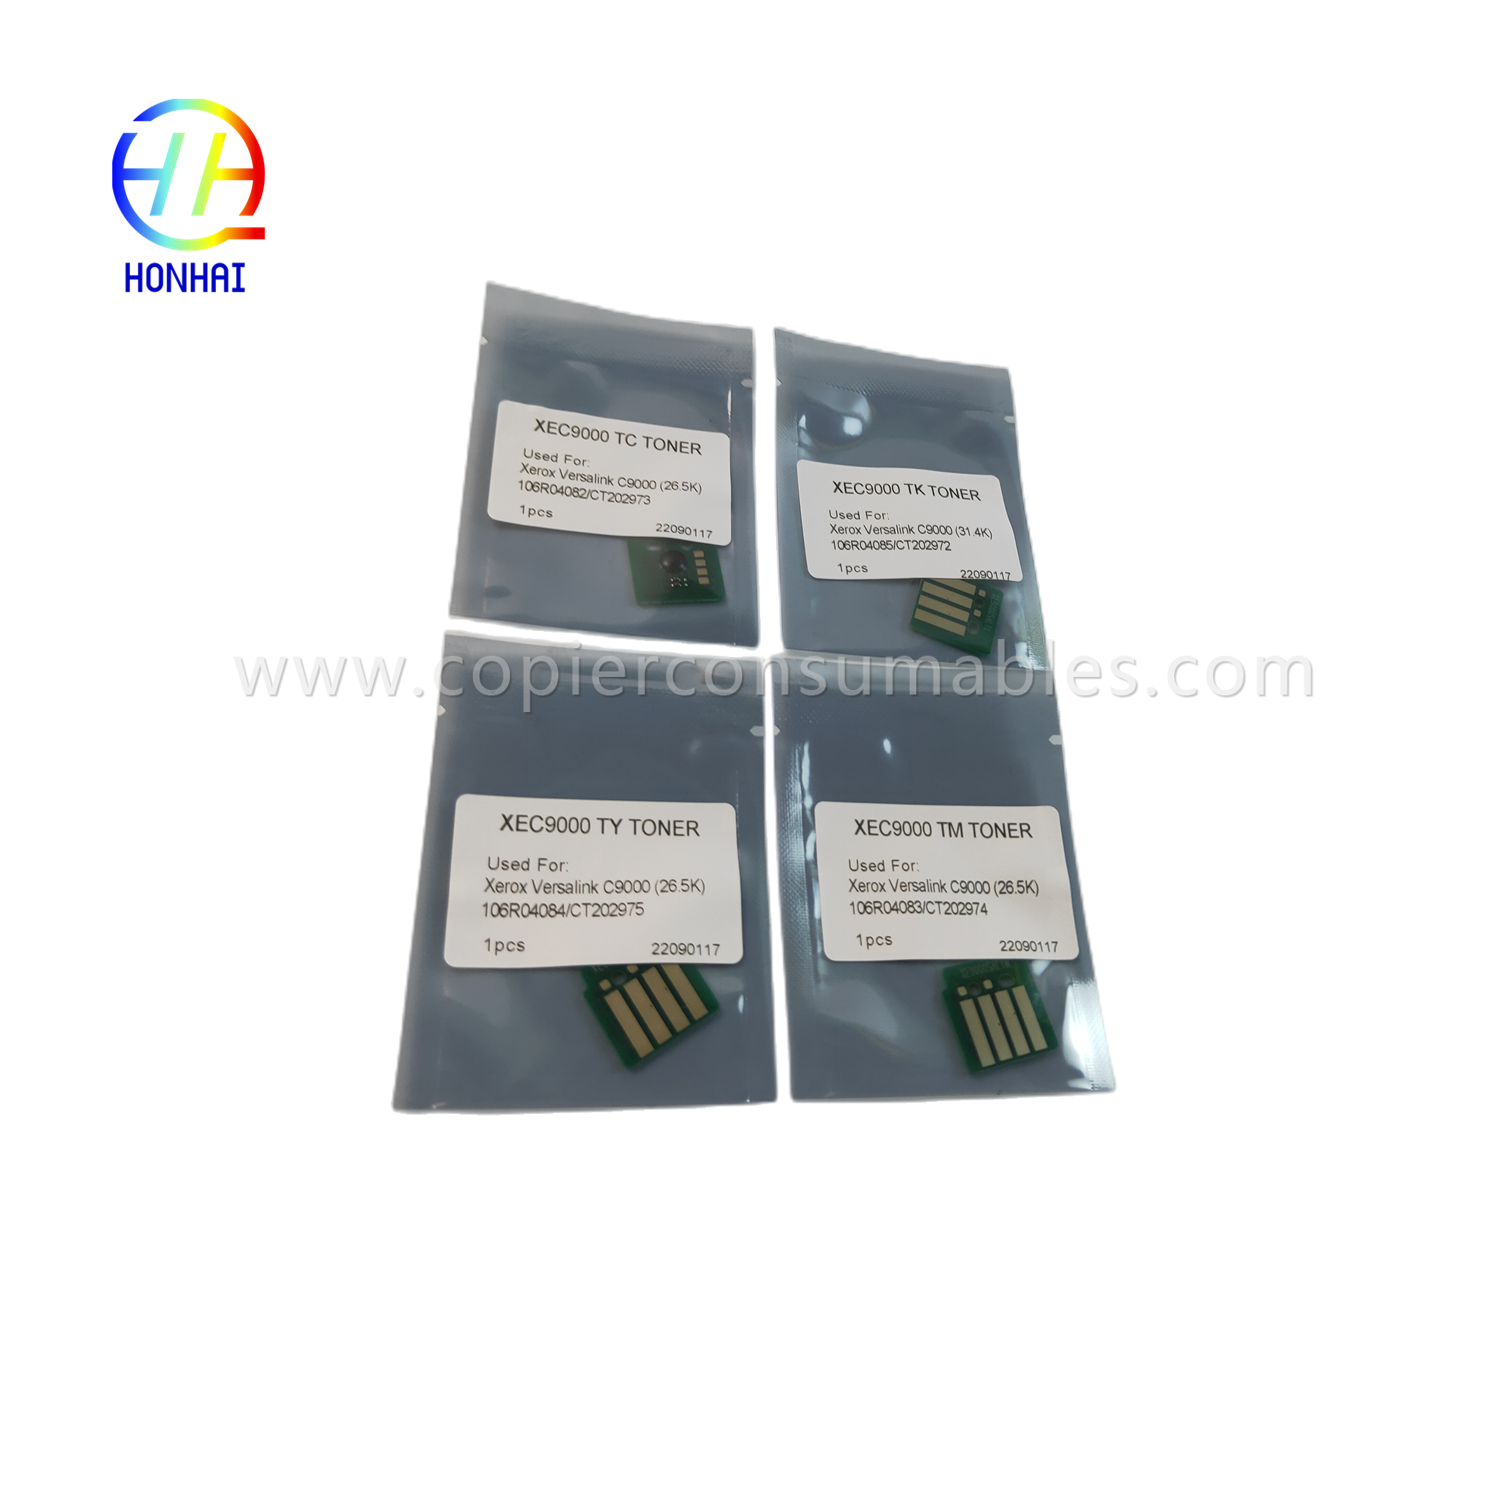 https://www.copierconsumables.com/toner-chipset-for-xerox-versalink-c9000-106r04085-106r04082-1​​06r04083-106r04084-chip-product/